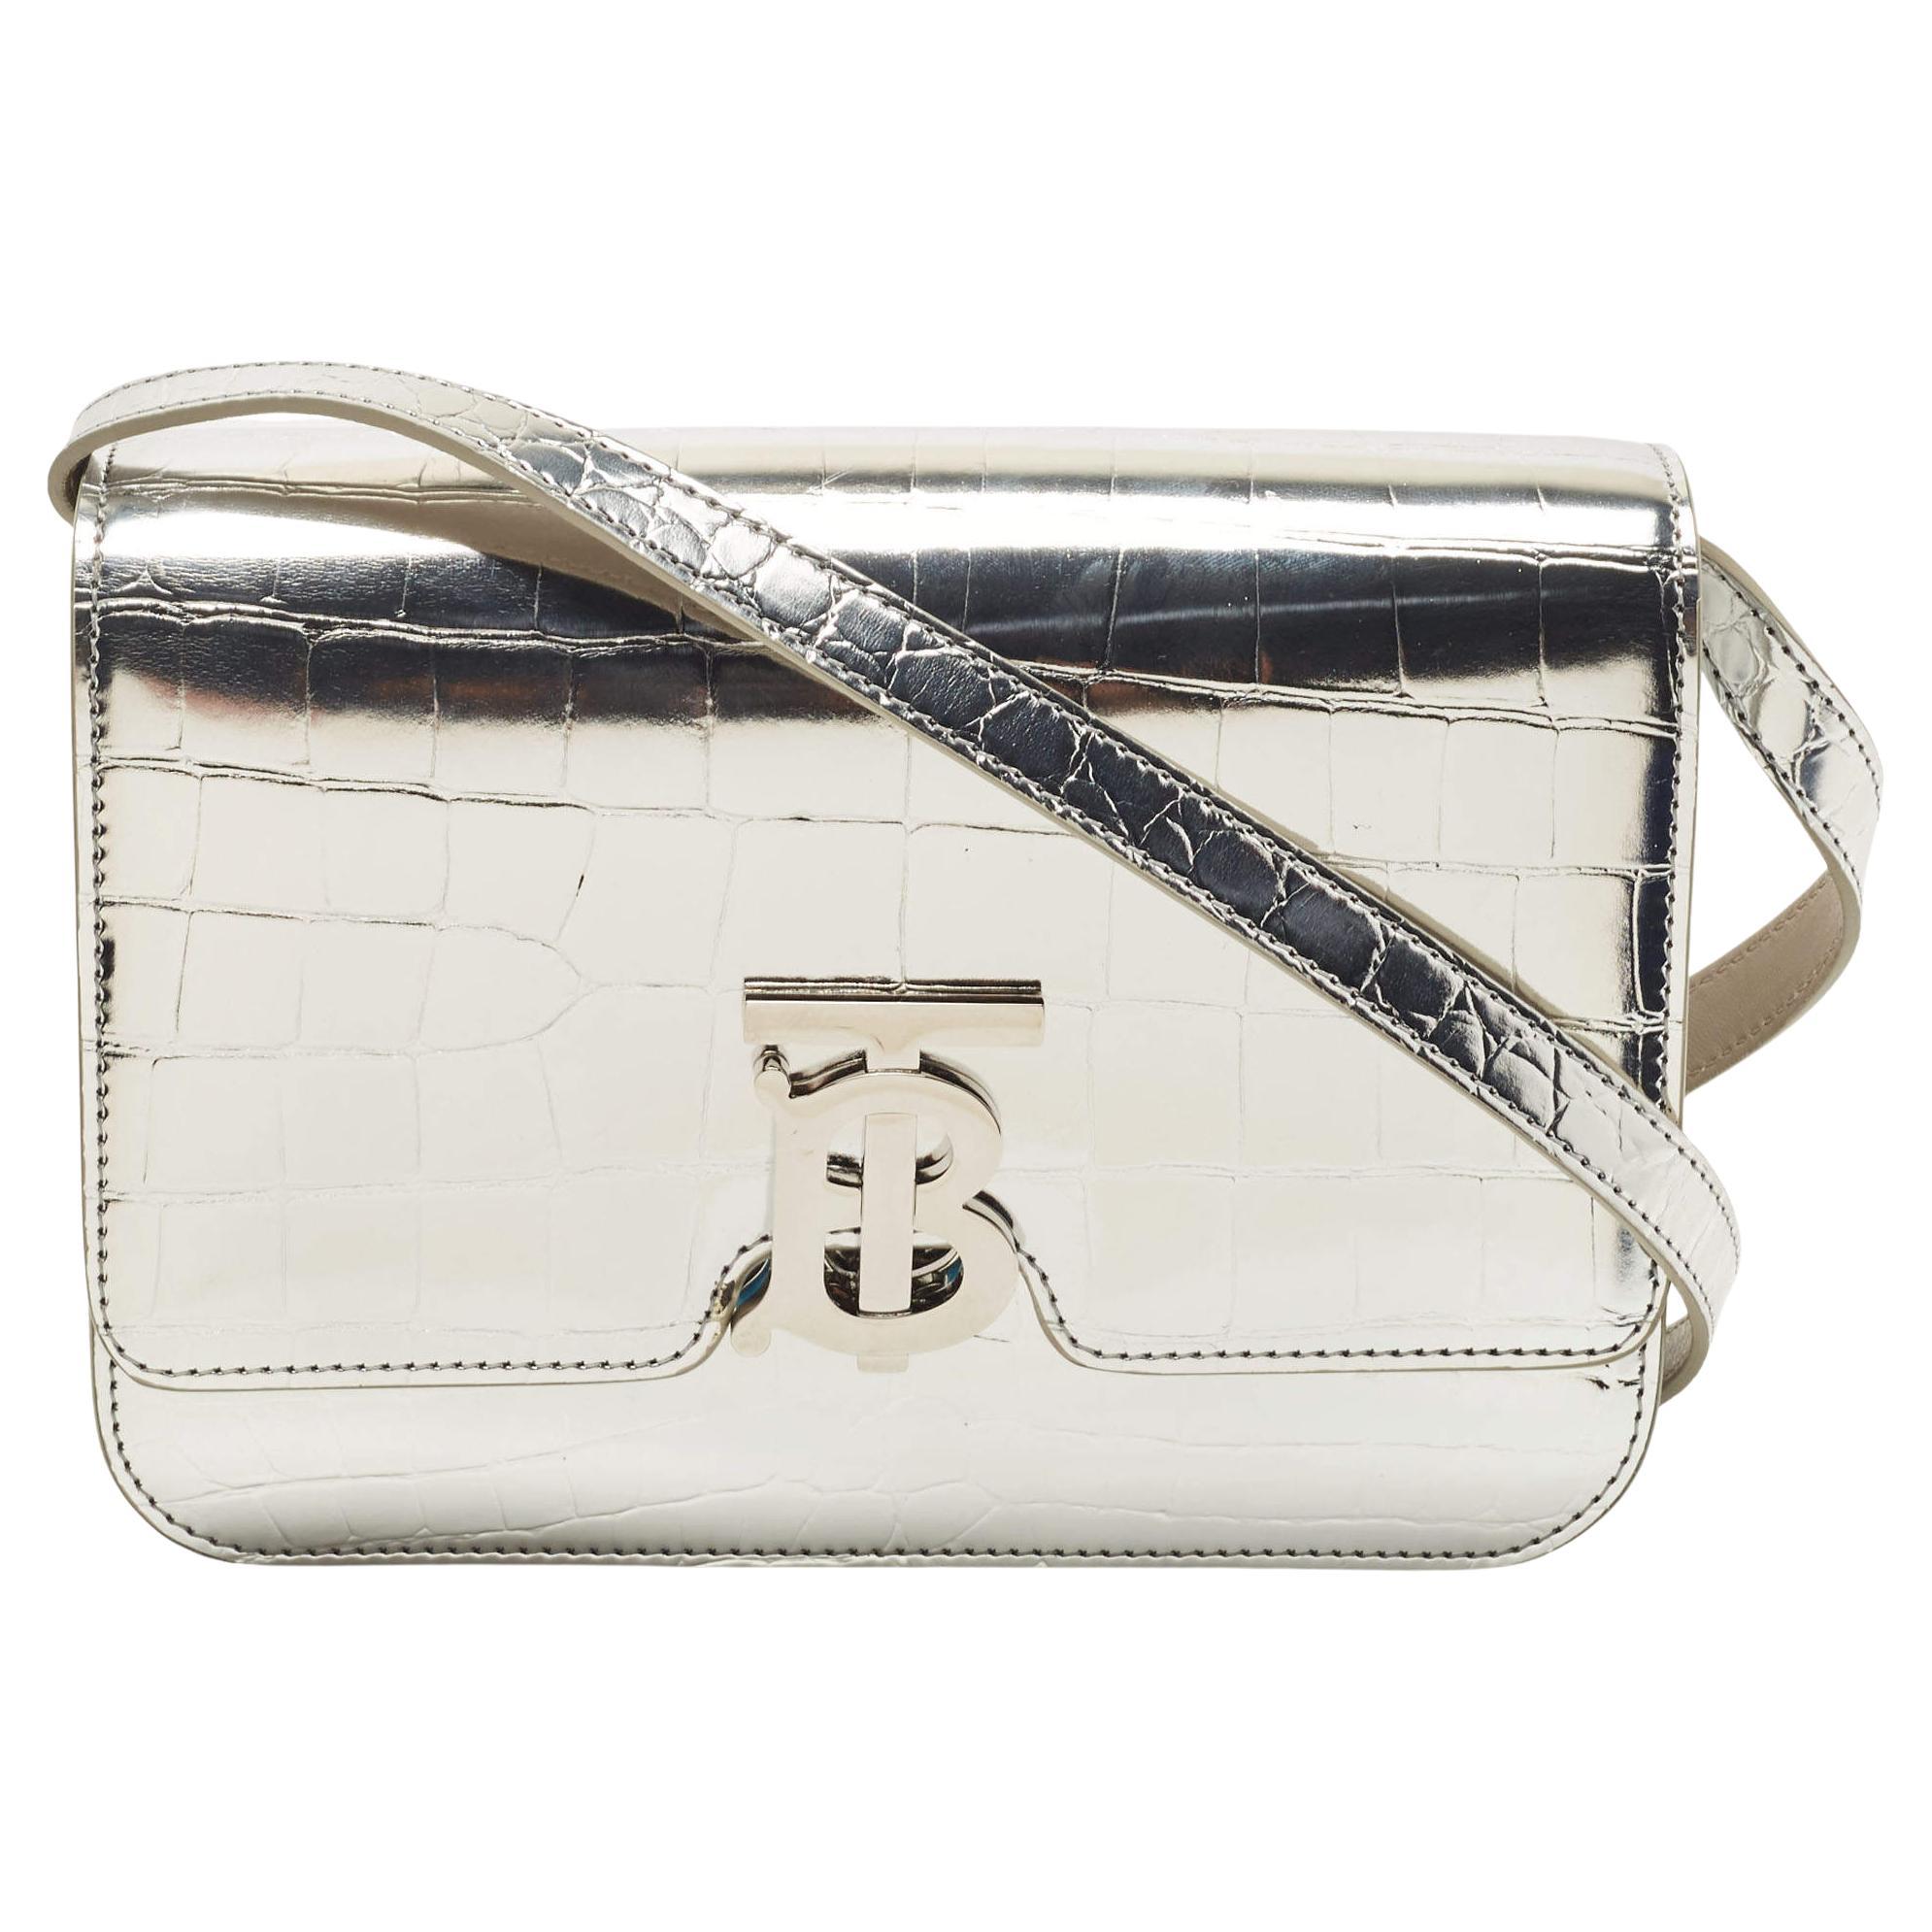 Burberry Silver Croc-Embossed Leather TB Buckle Crossbody Bag